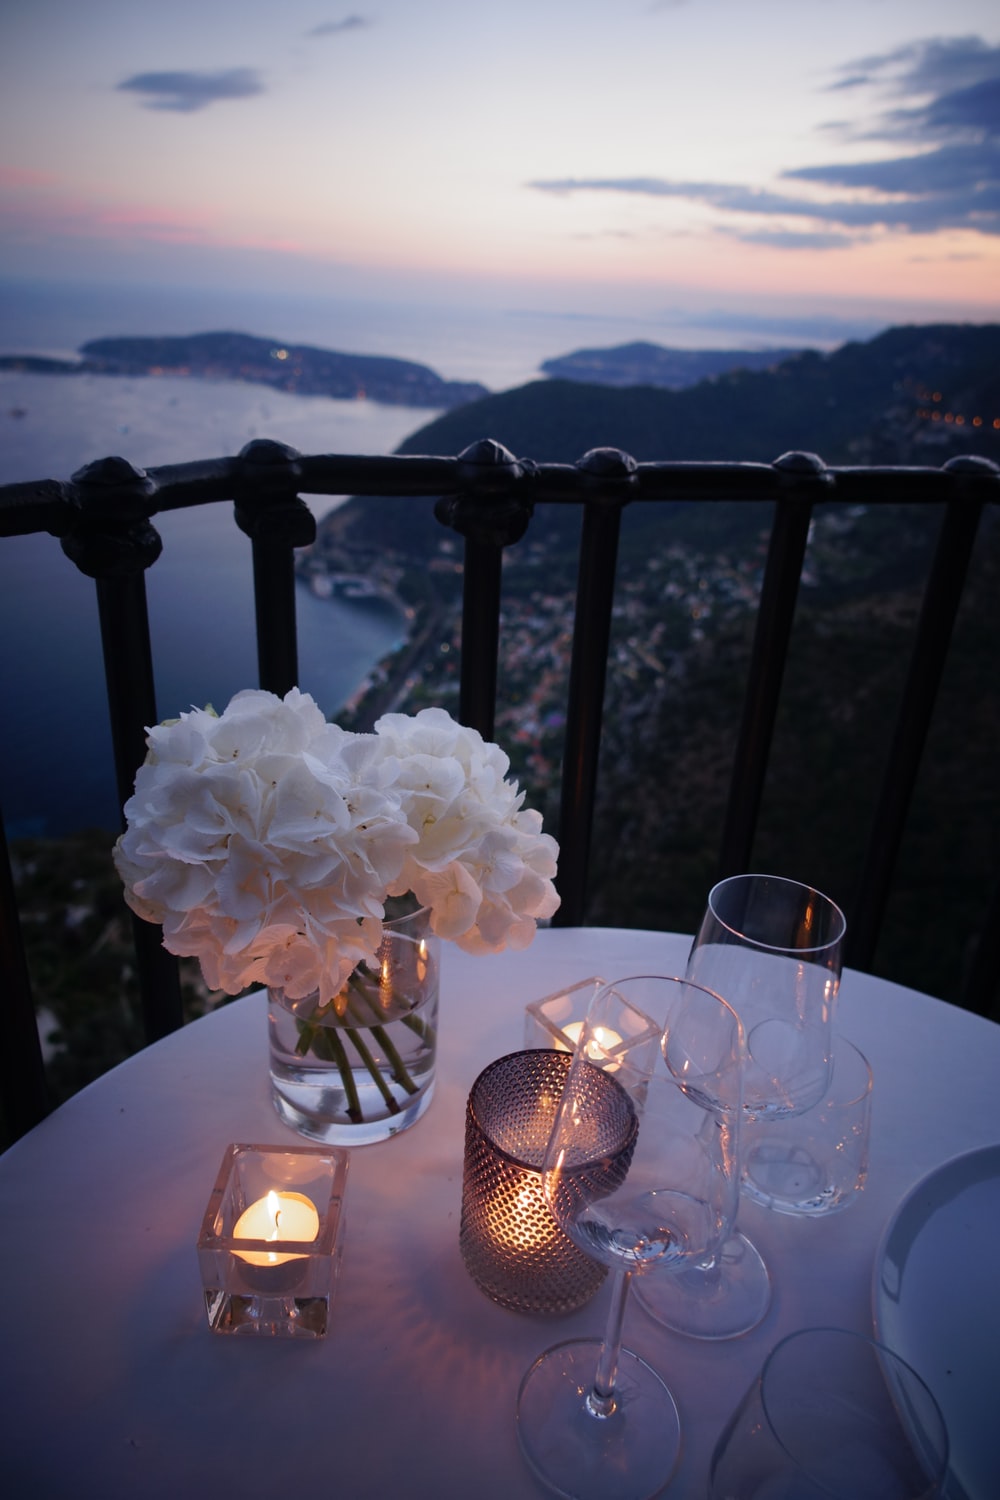 Romantic Dinner Pictures [HD] Download Free Images on